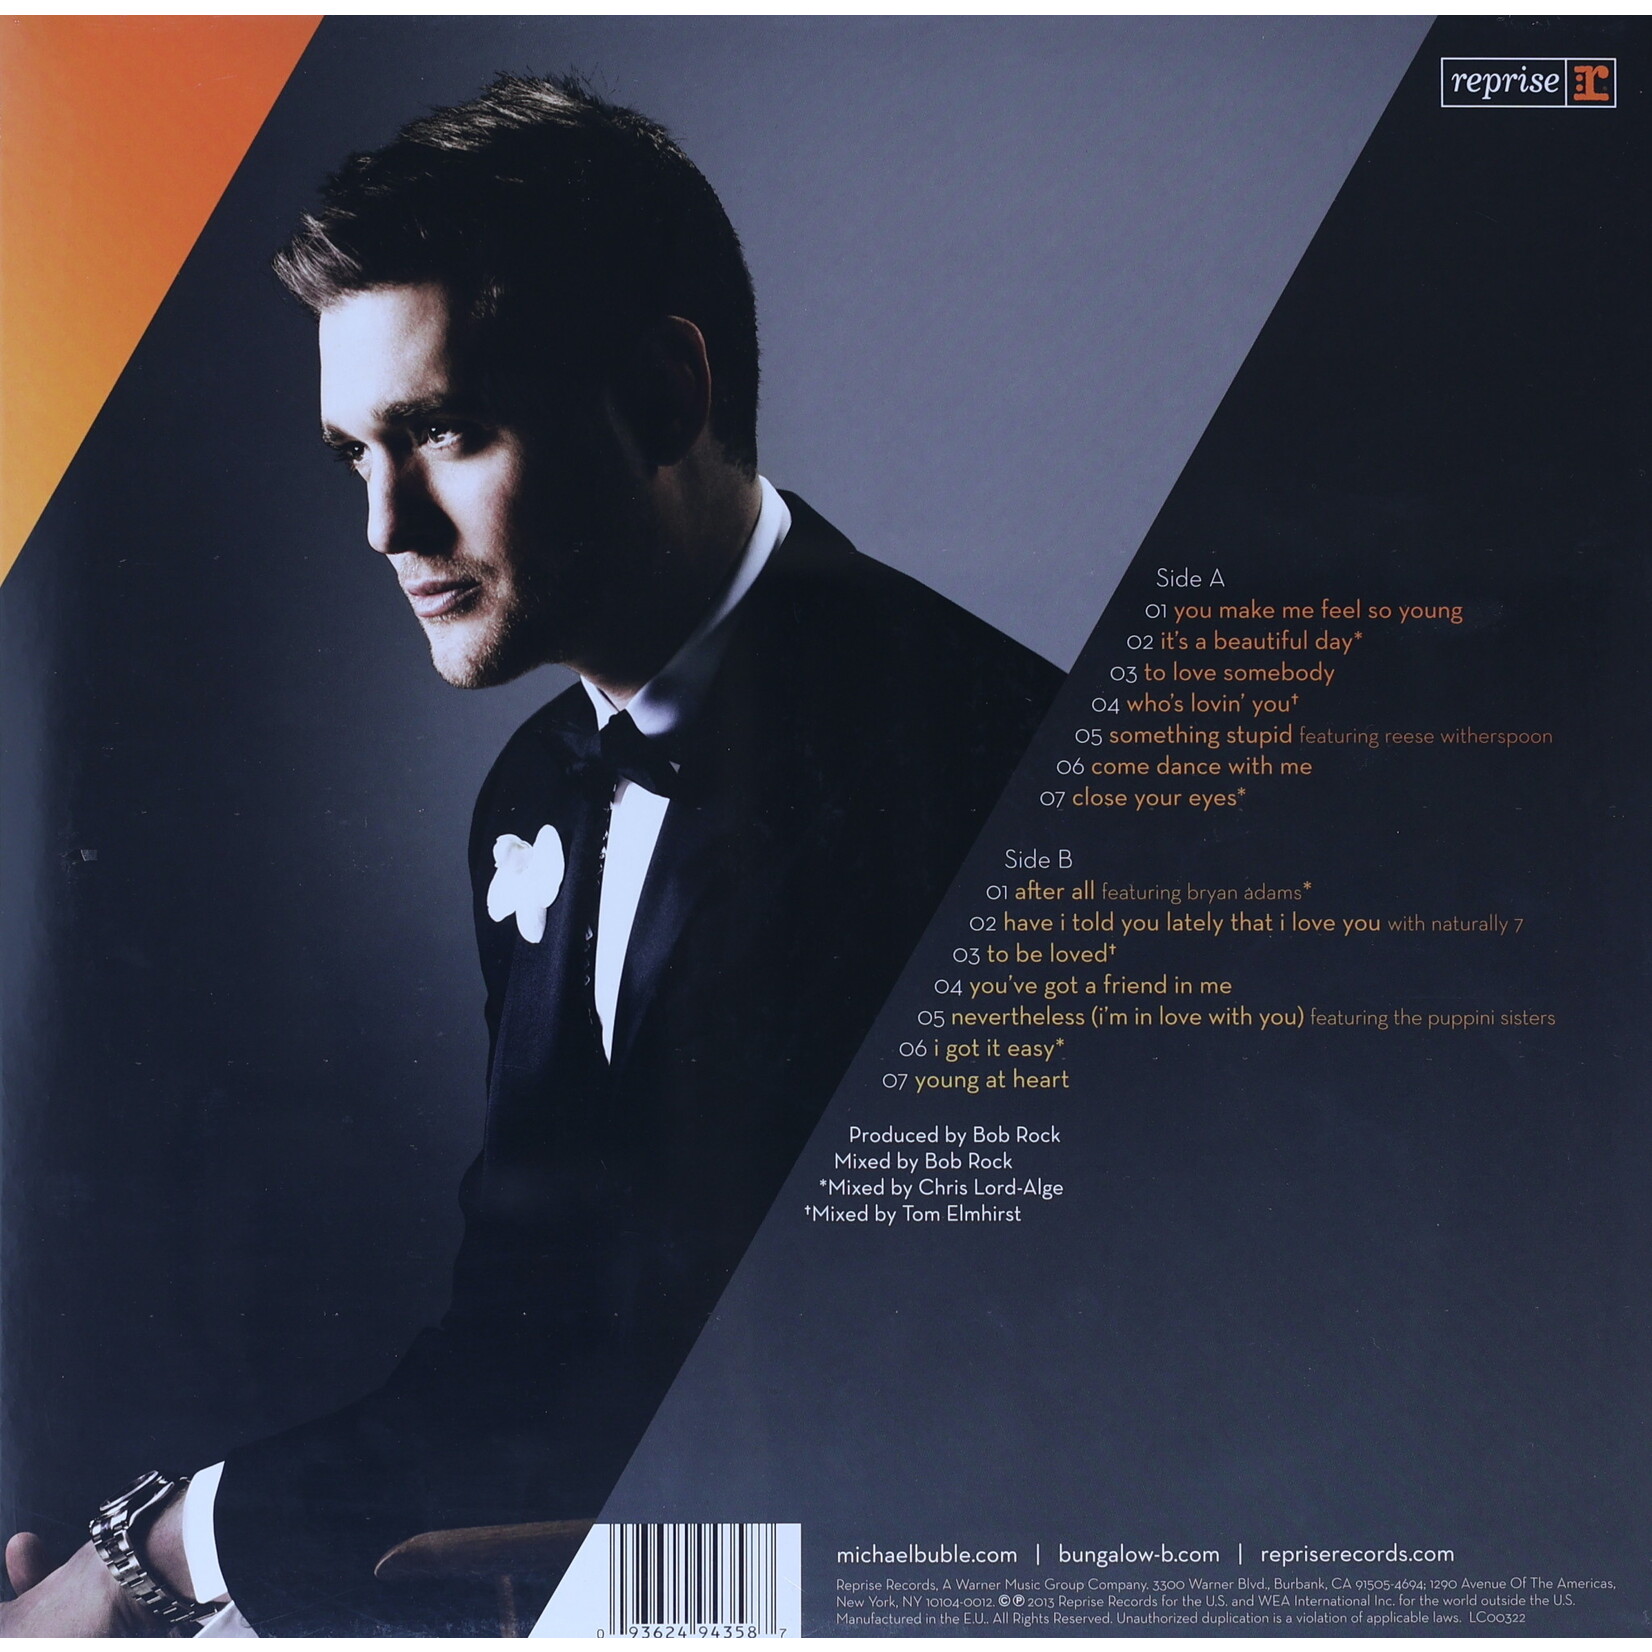 MICHAEL BUBLE - TO BE LOVED - LP